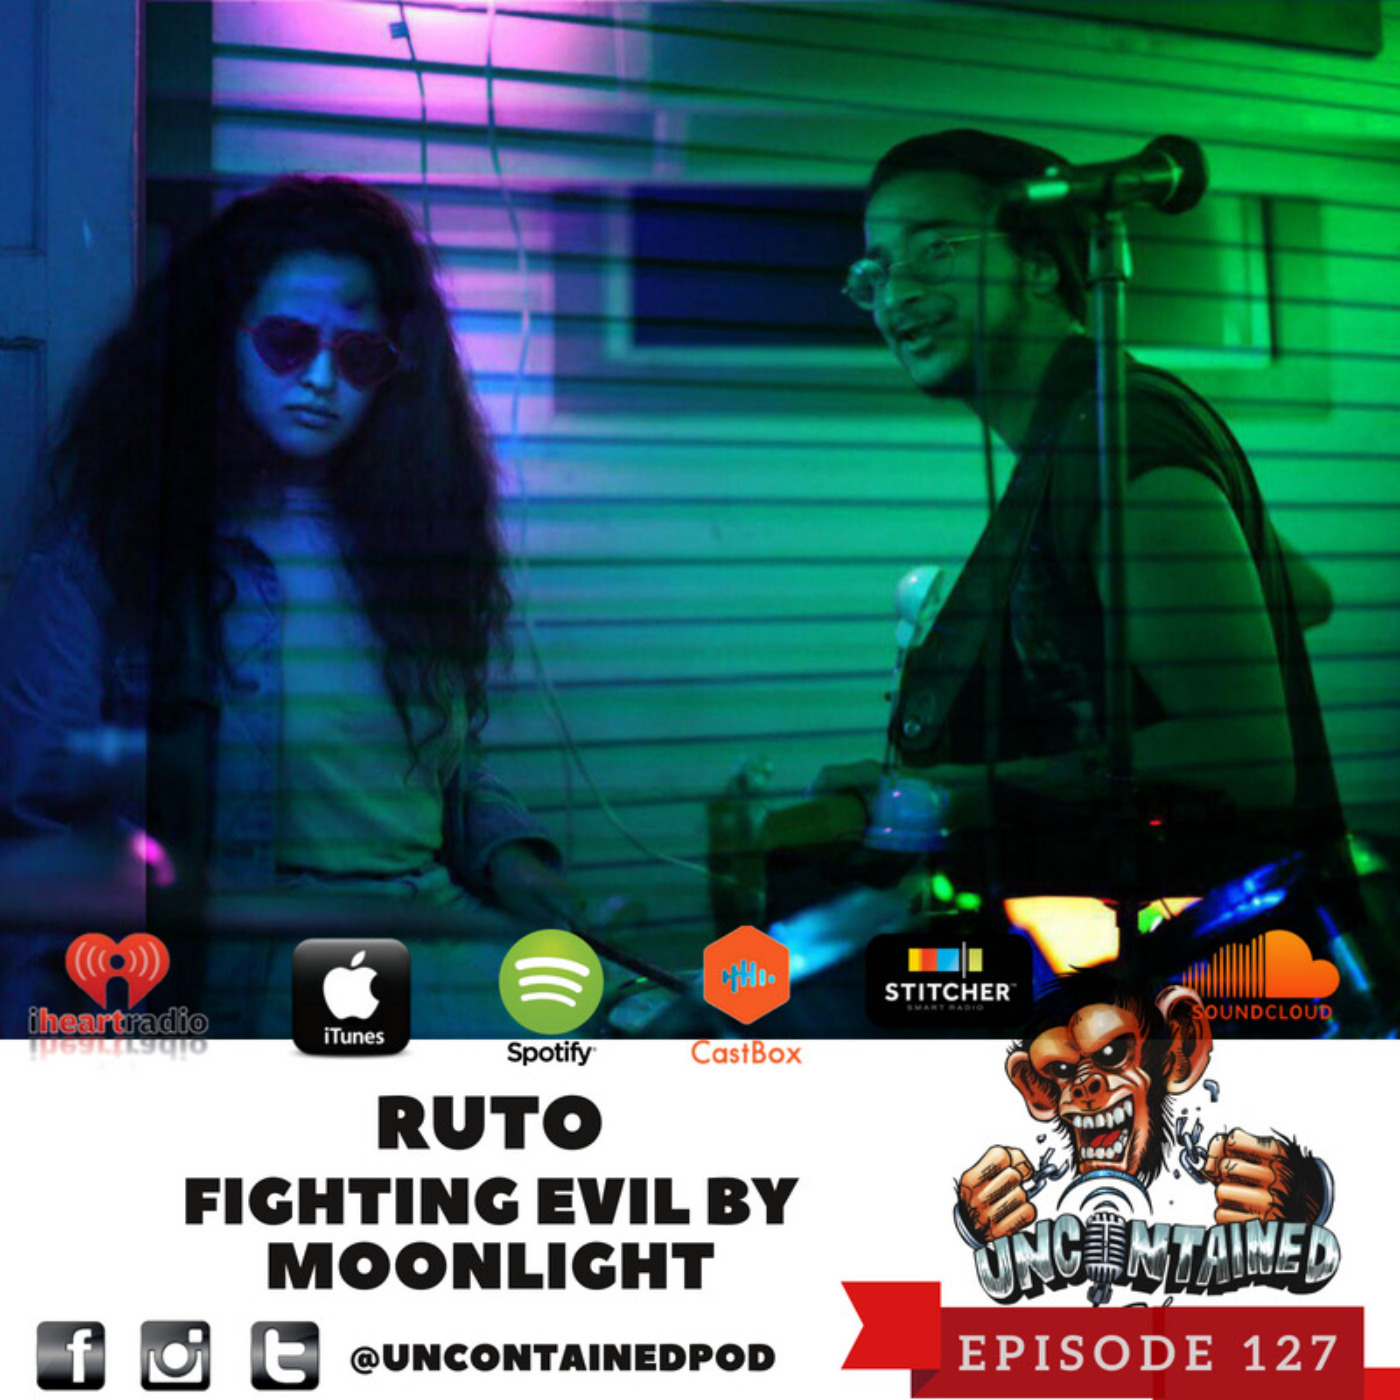 Episode 127: Ruto - Fighting Evil By Moonlight